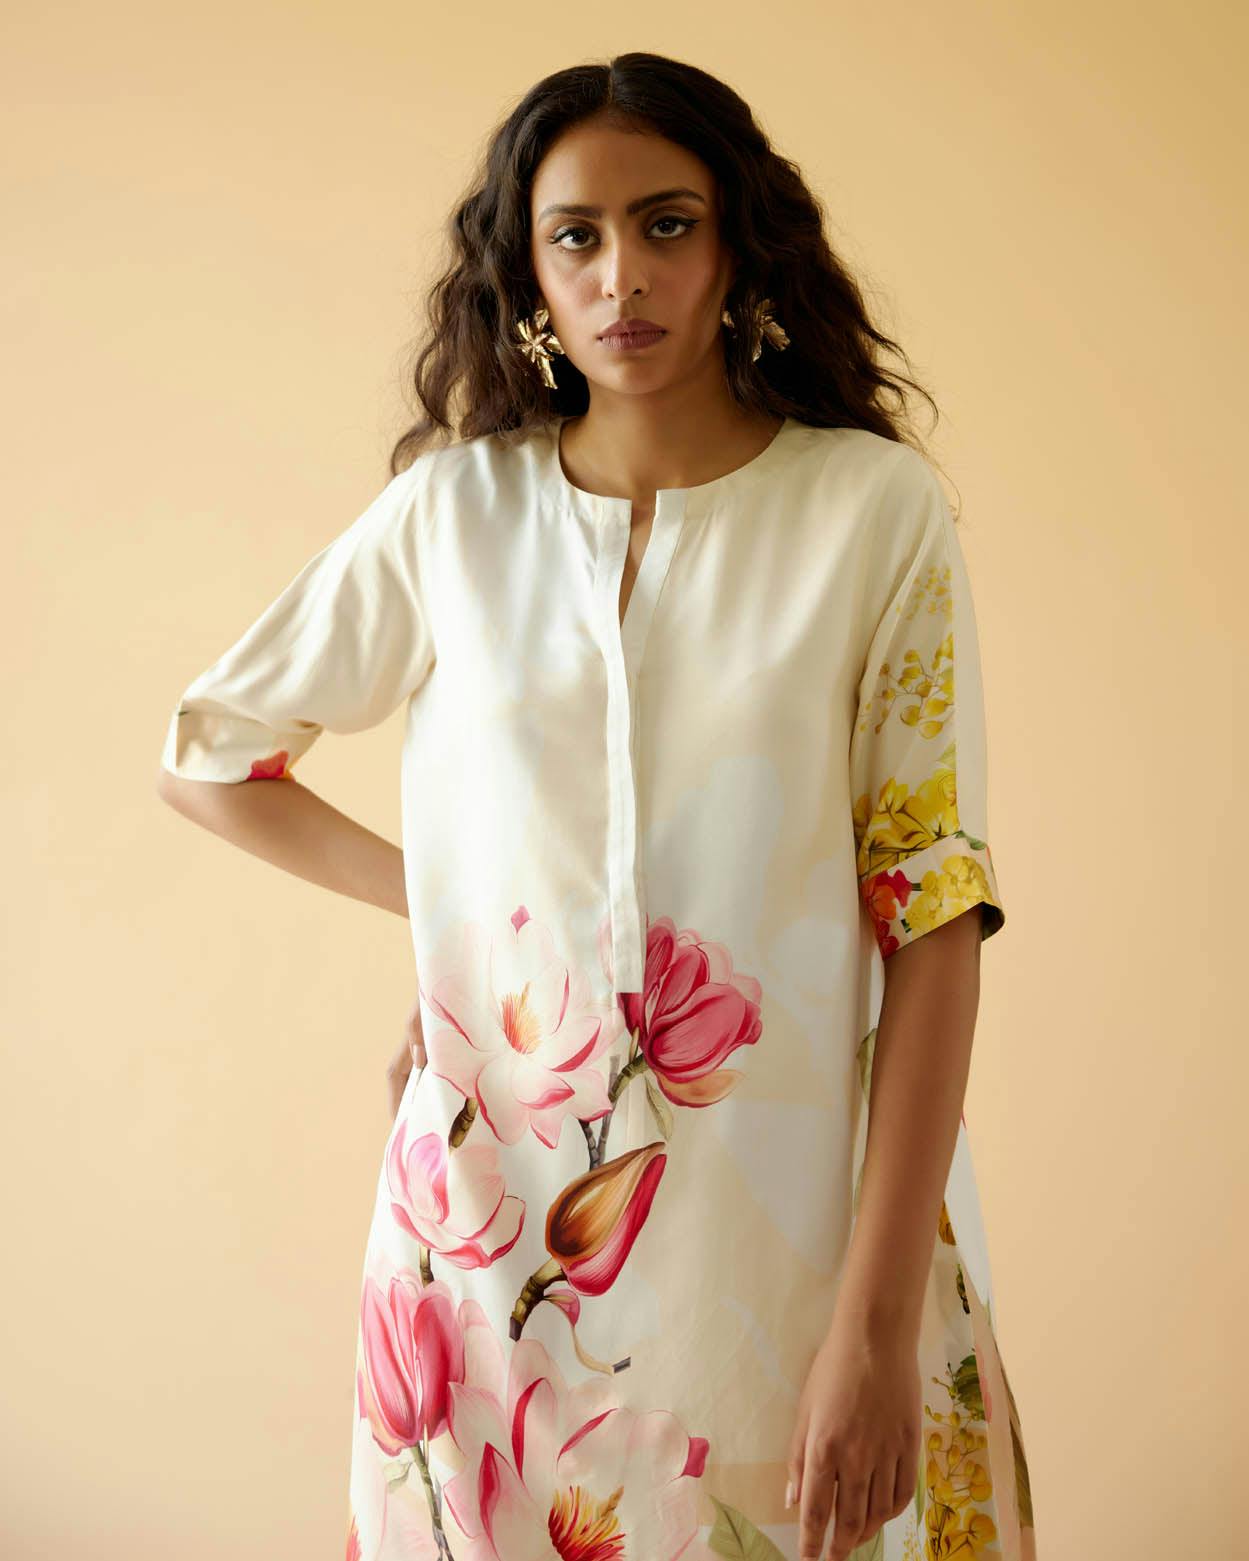 Gazelle Tunic, a product by Moh India